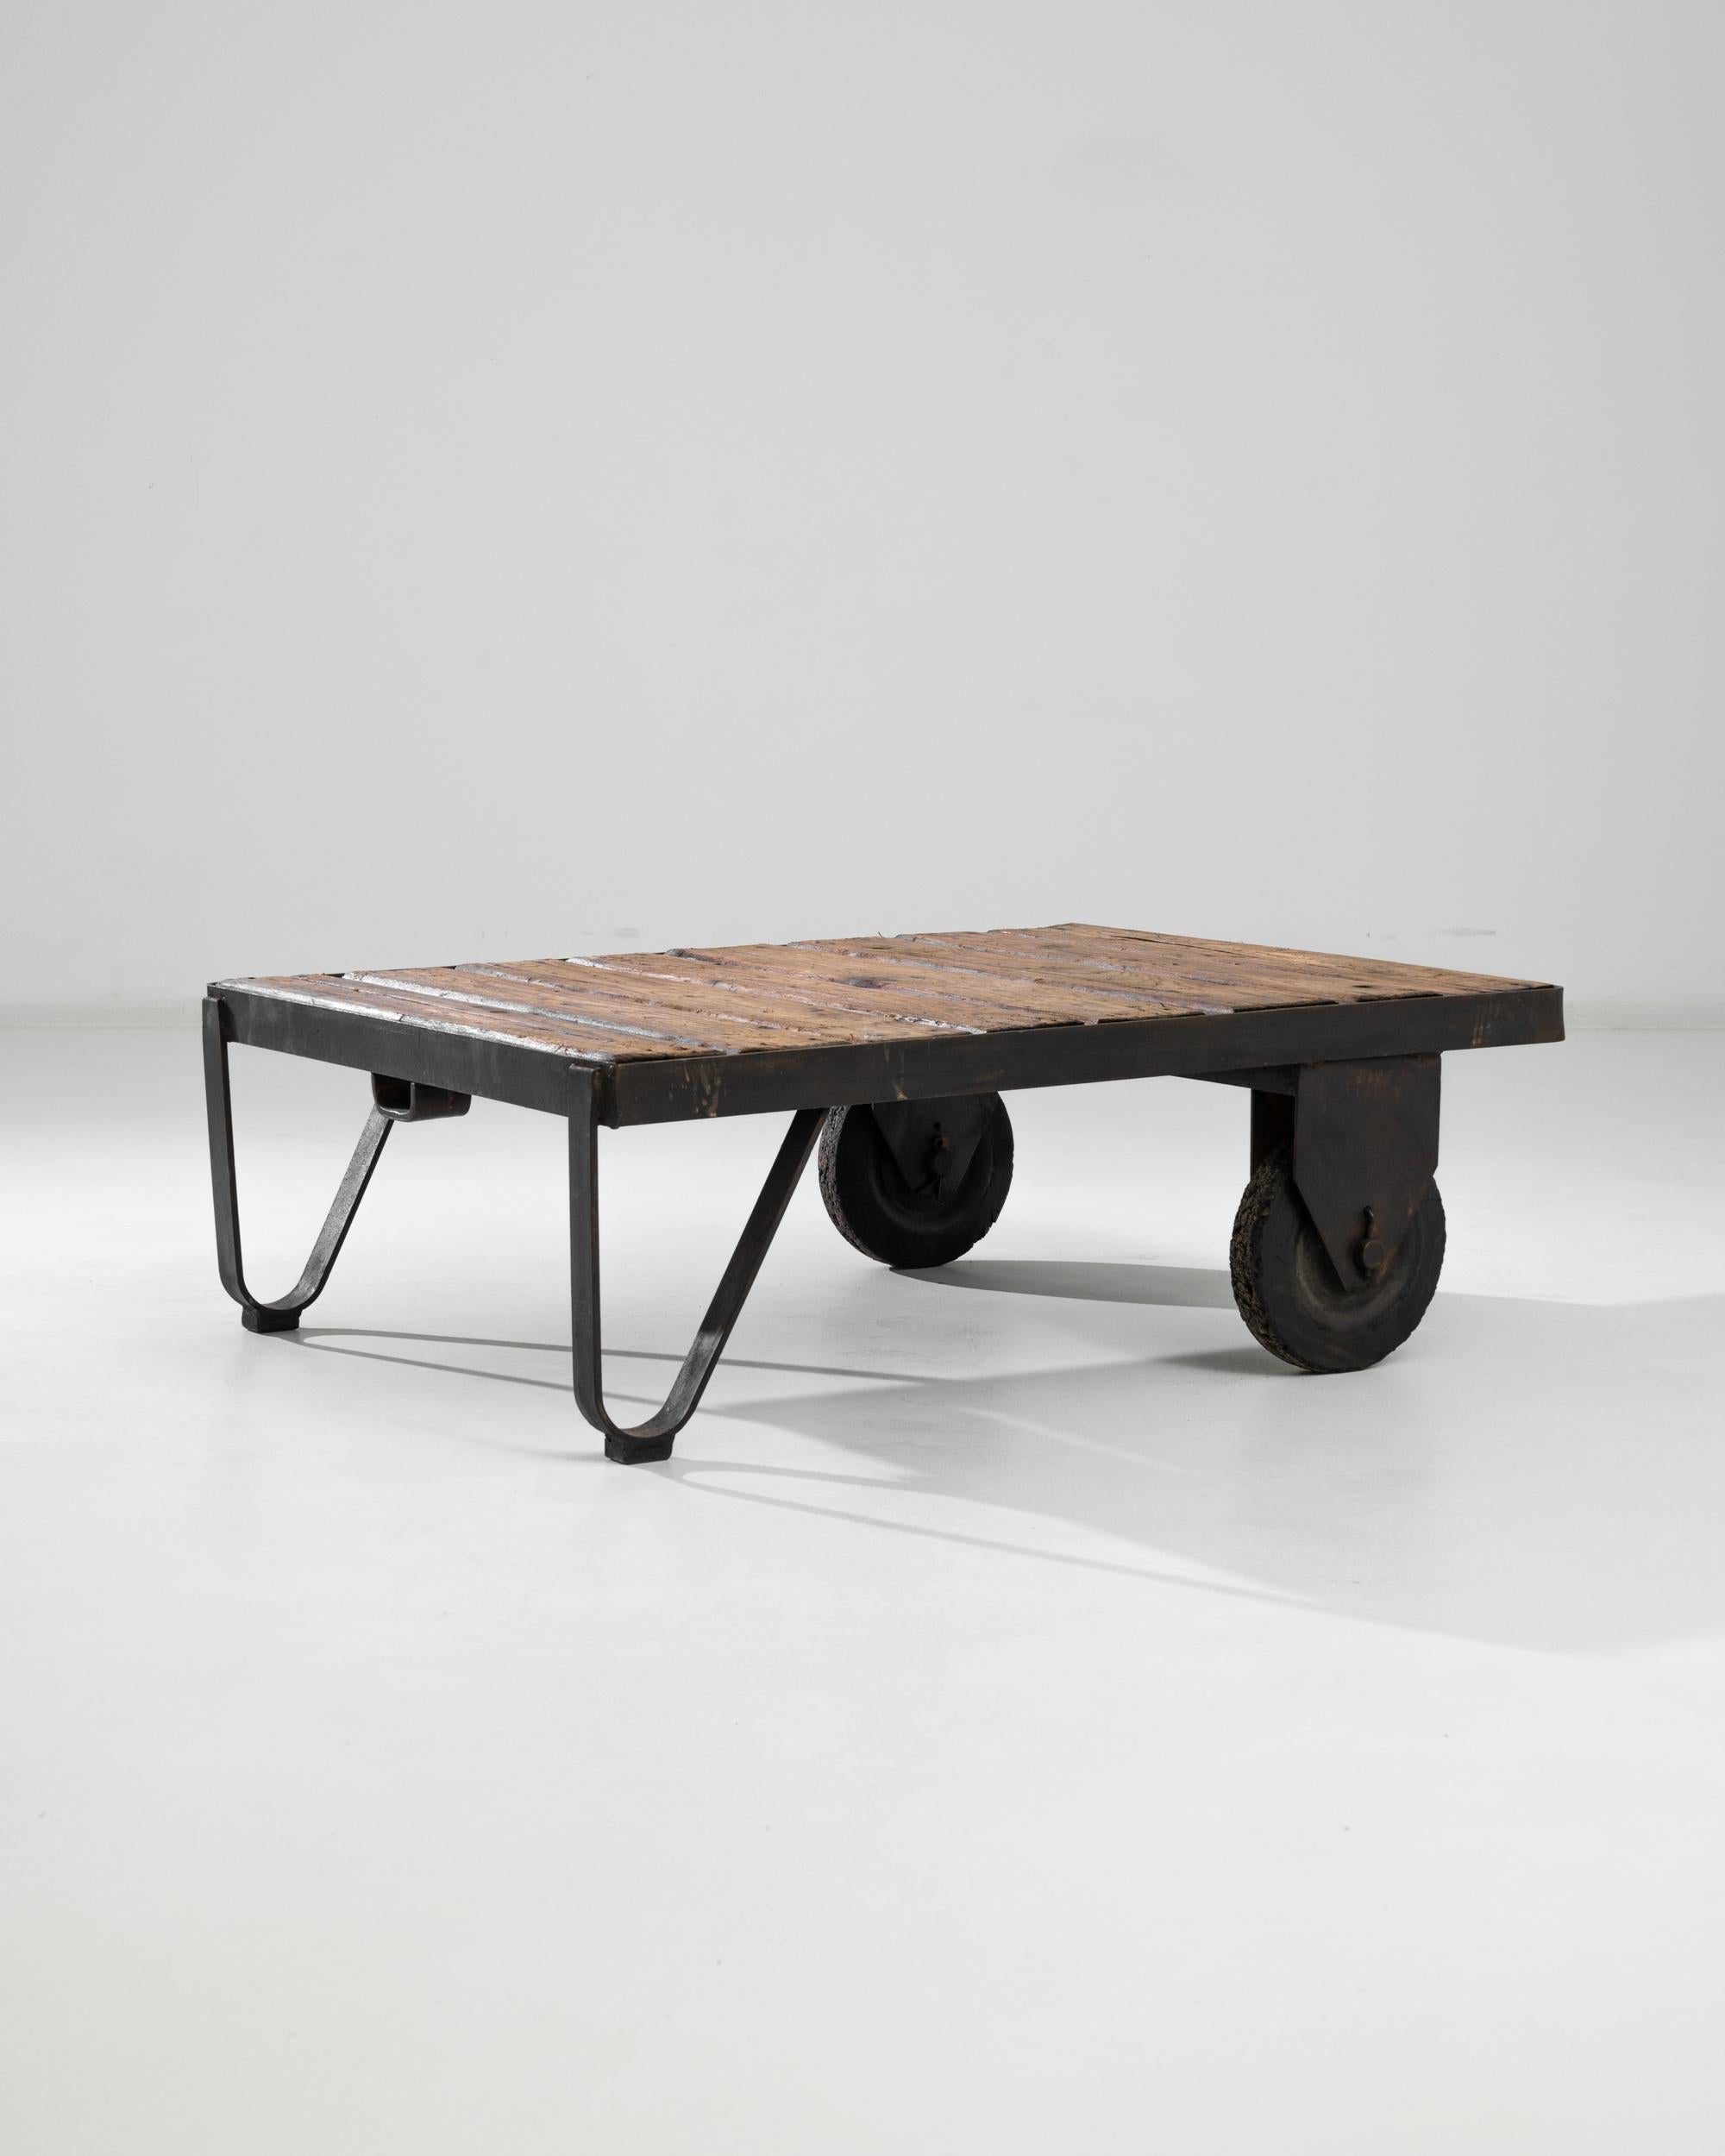 A metal coffee table on wheels from Central Europe, produced during the 20th century. Eight stretched out horizontal planks mounted in black metal frame resting on two “U” shaped metal supports and a pair of wheels—giving it the functional